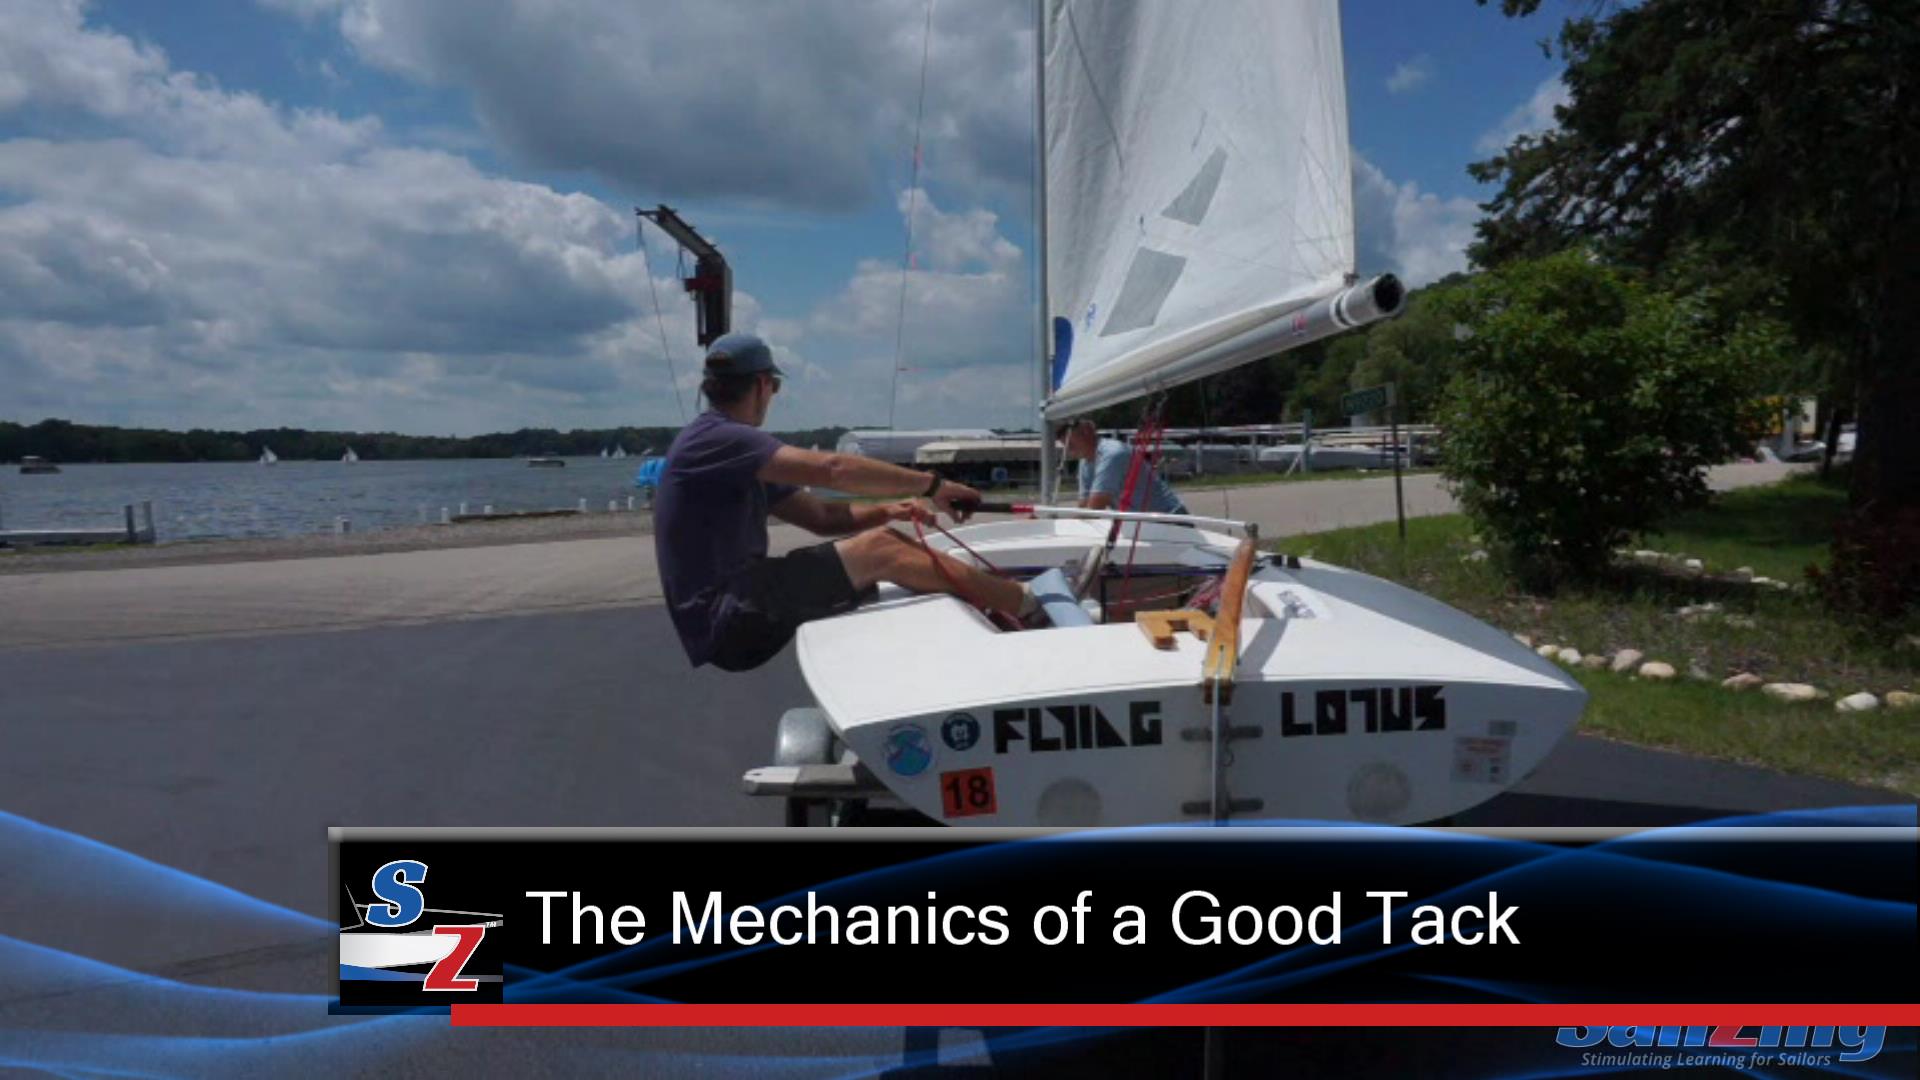 Practice the Body Mechanics of Tacking to Improve Your Sailing